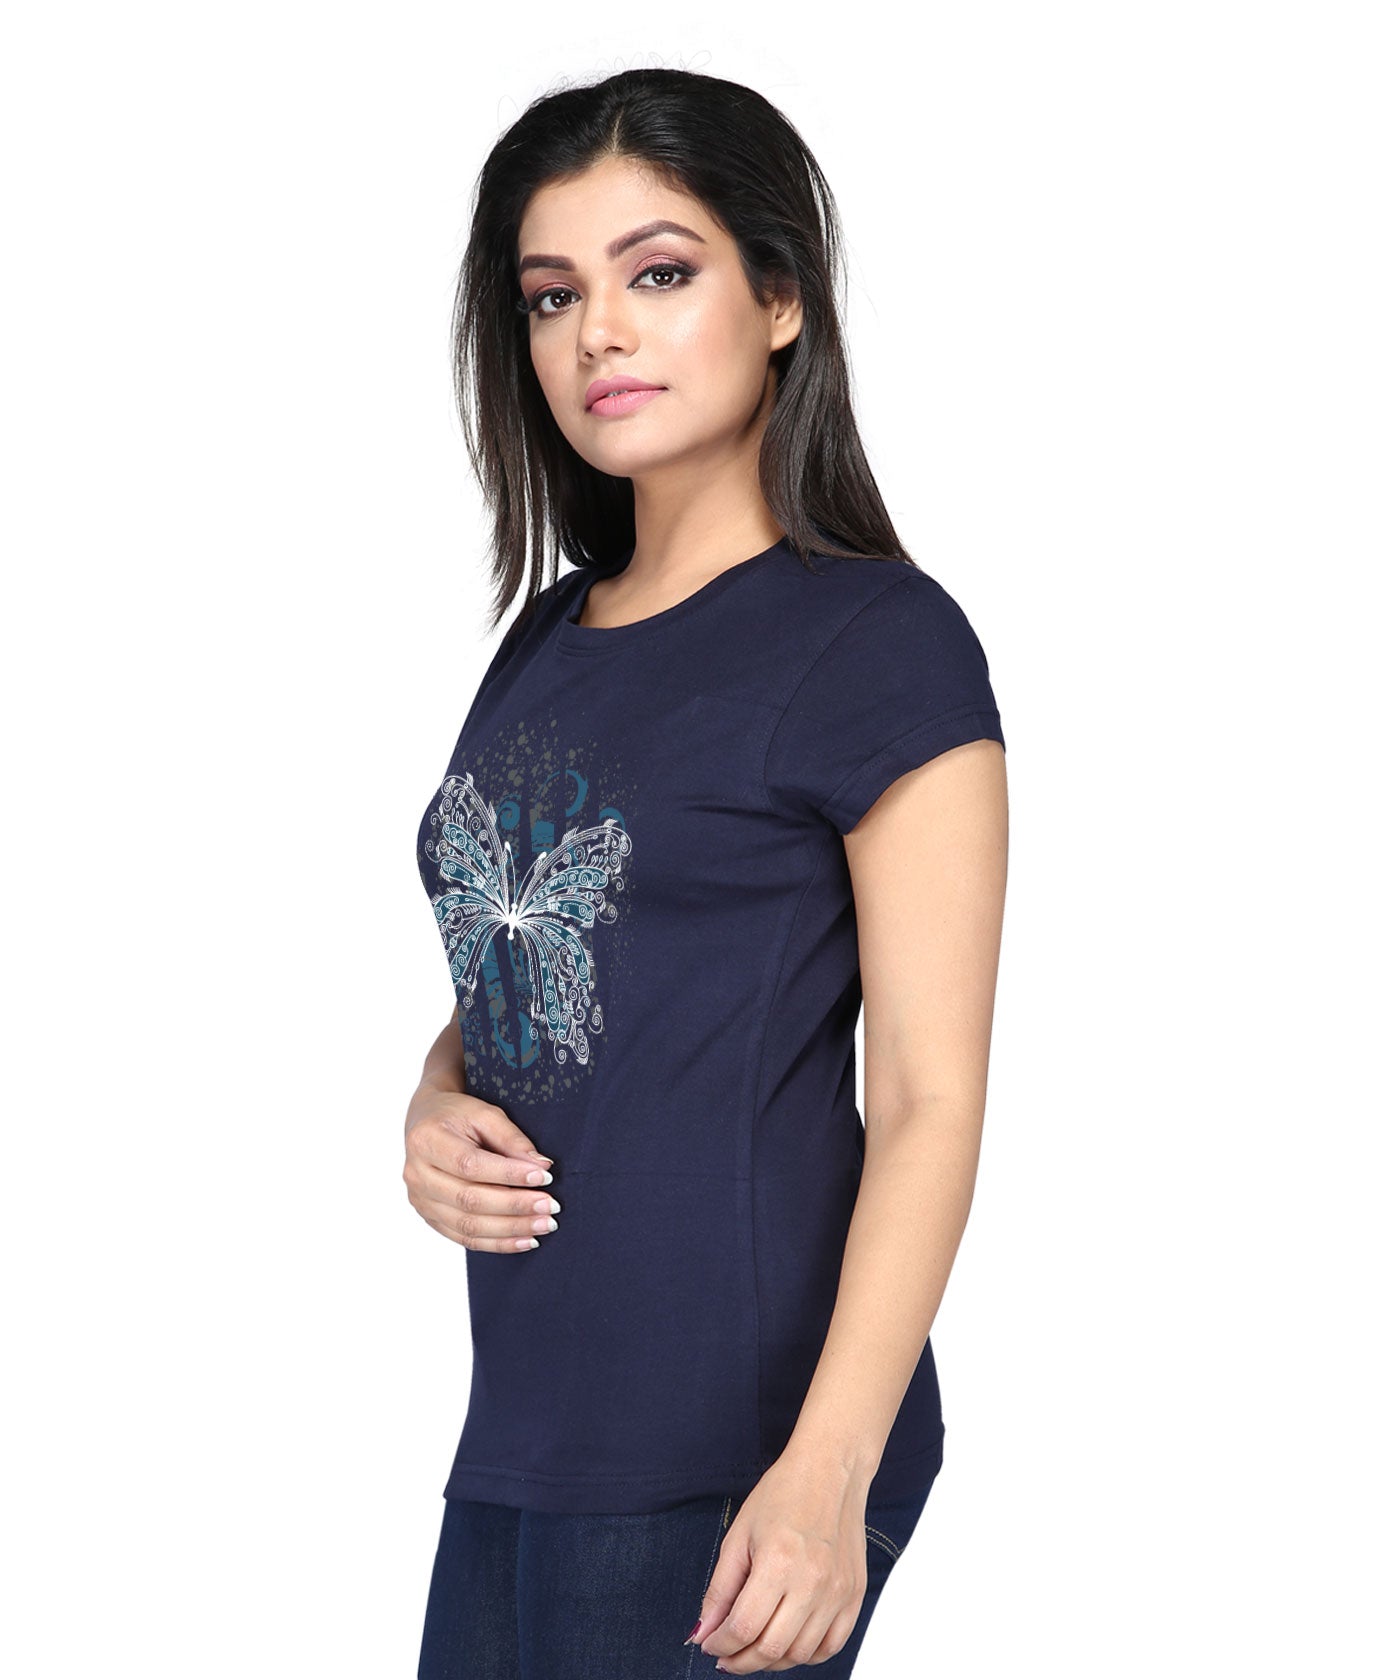 Butterfly - Premium Round Neck Cotton Tees for Women - Navy Blue